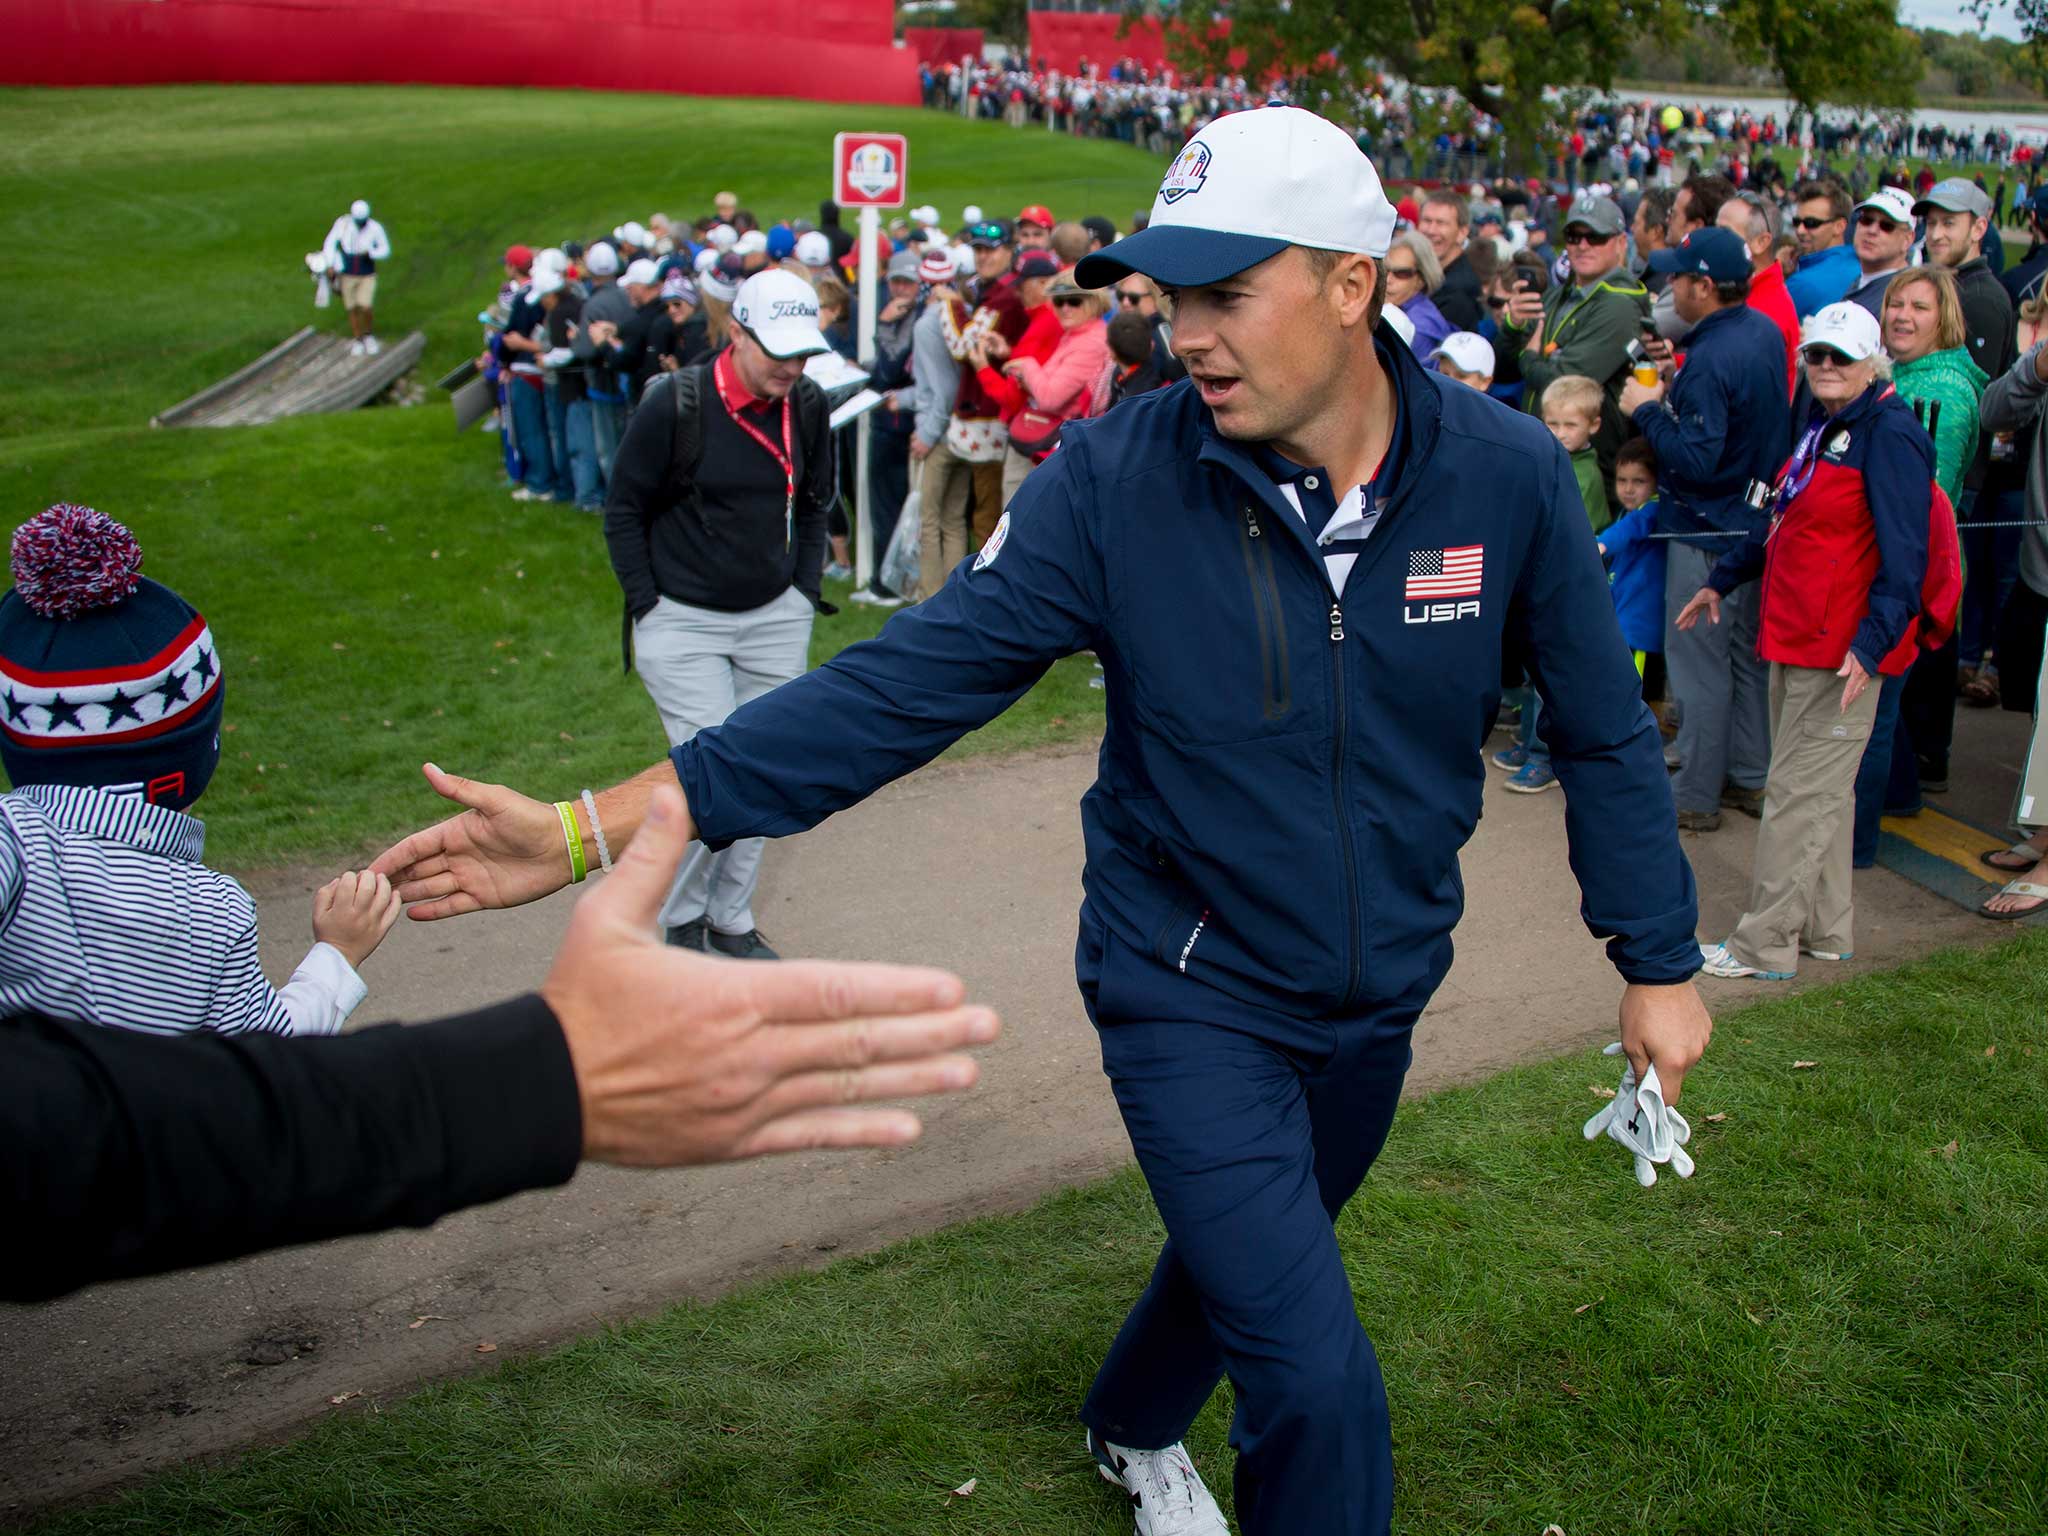 Jordan Spieth is preparing for the first tee at Gleneagles